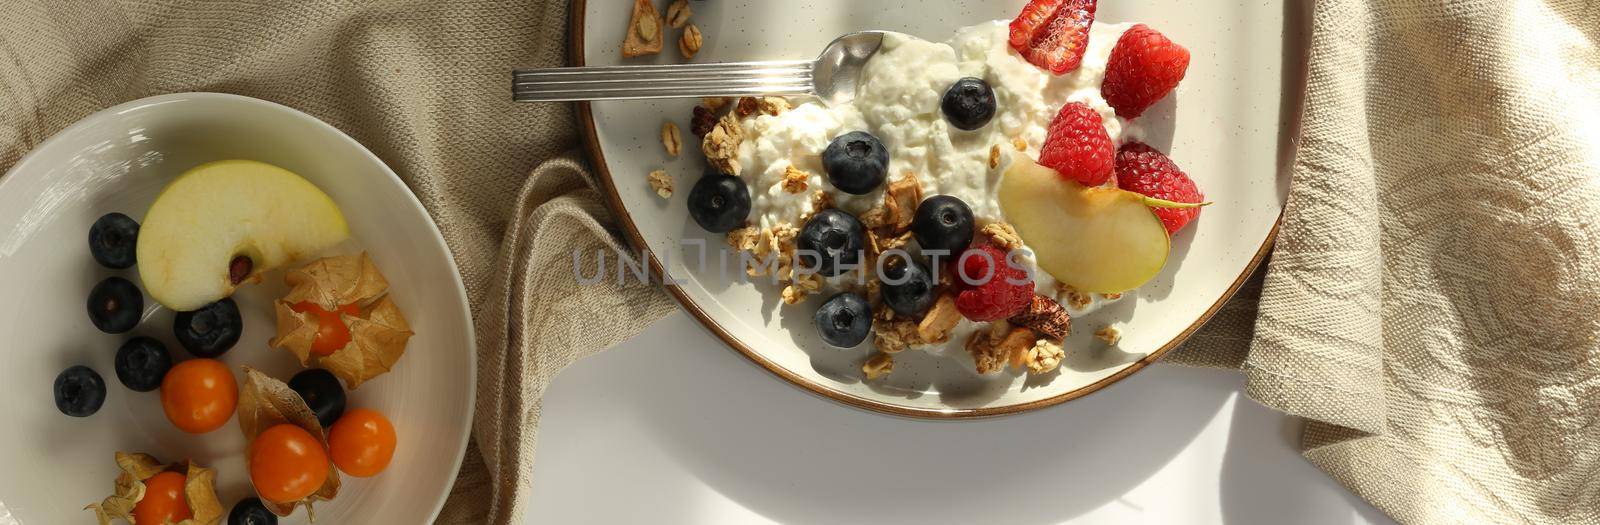 Healthy breakfast yogurt bowl with granola and berries. Rustic backgroundwith morning sun light. Concept of clean eating, dieting and weight loss. Horizontal top view, flat lay